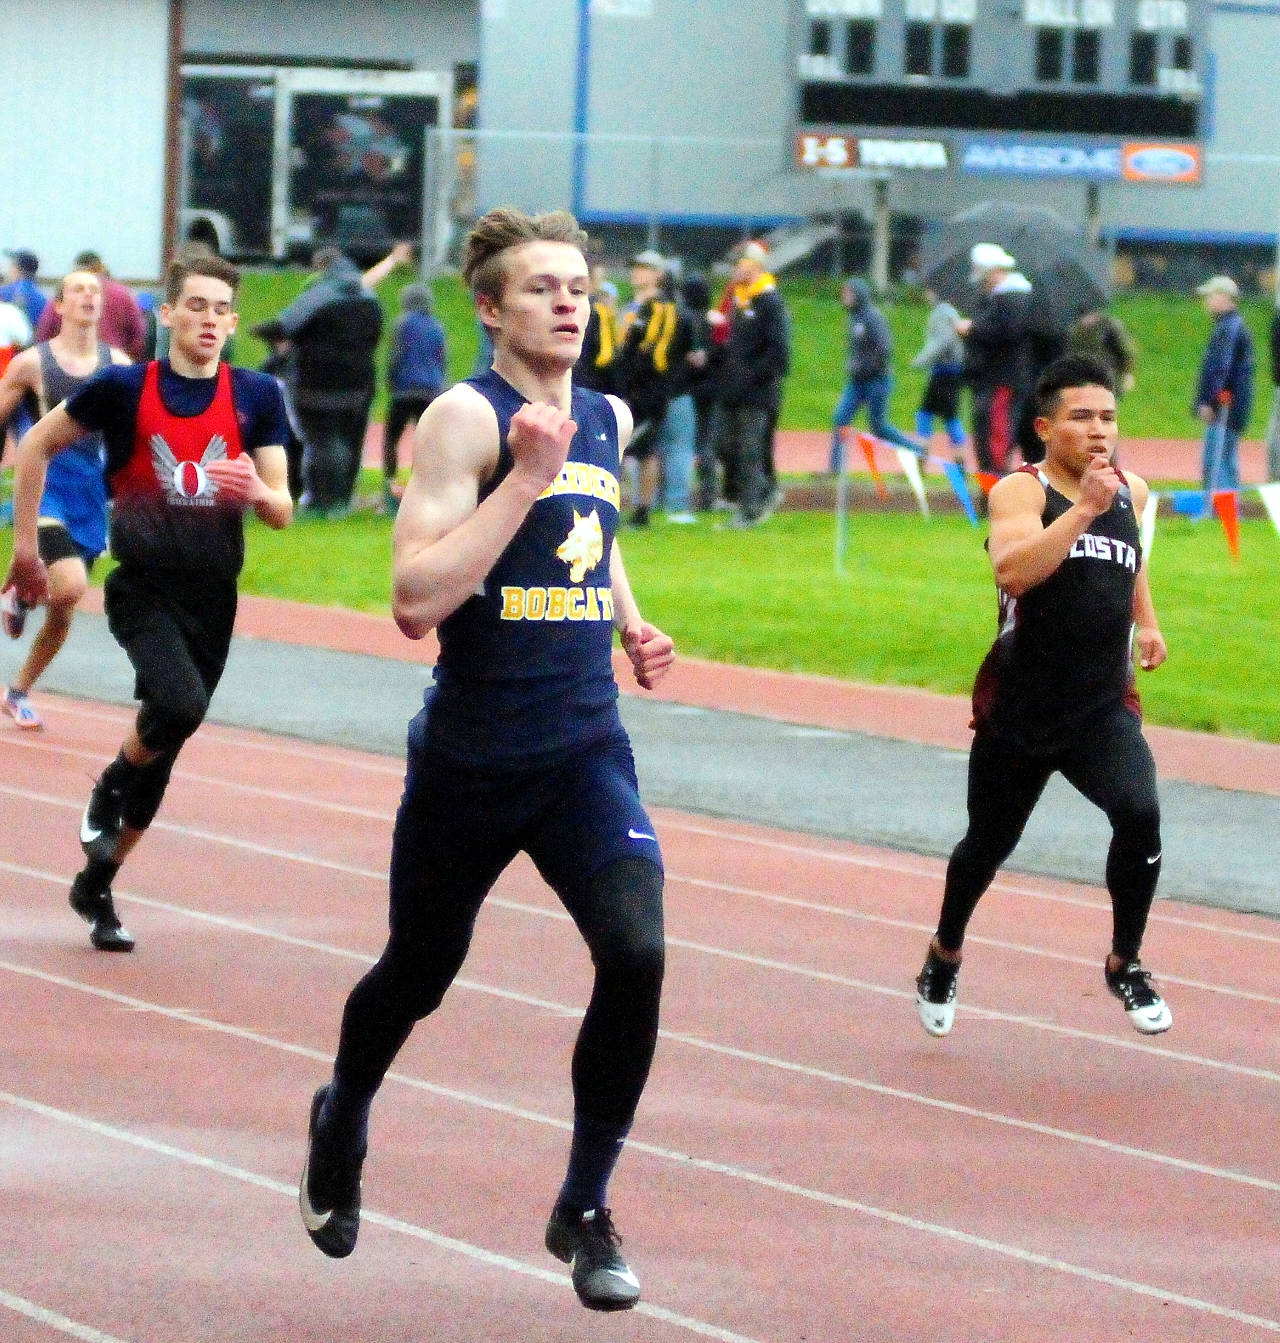 Aberdeen’s Wyatt Johnson, center, pulls ahead and wins the 400 meters at the Chehalis Activators meet on Friday. Johnson advanced to Saturday’s finals with a time of 53.95. (Hasani Grayson | Grays Harbor News Group)